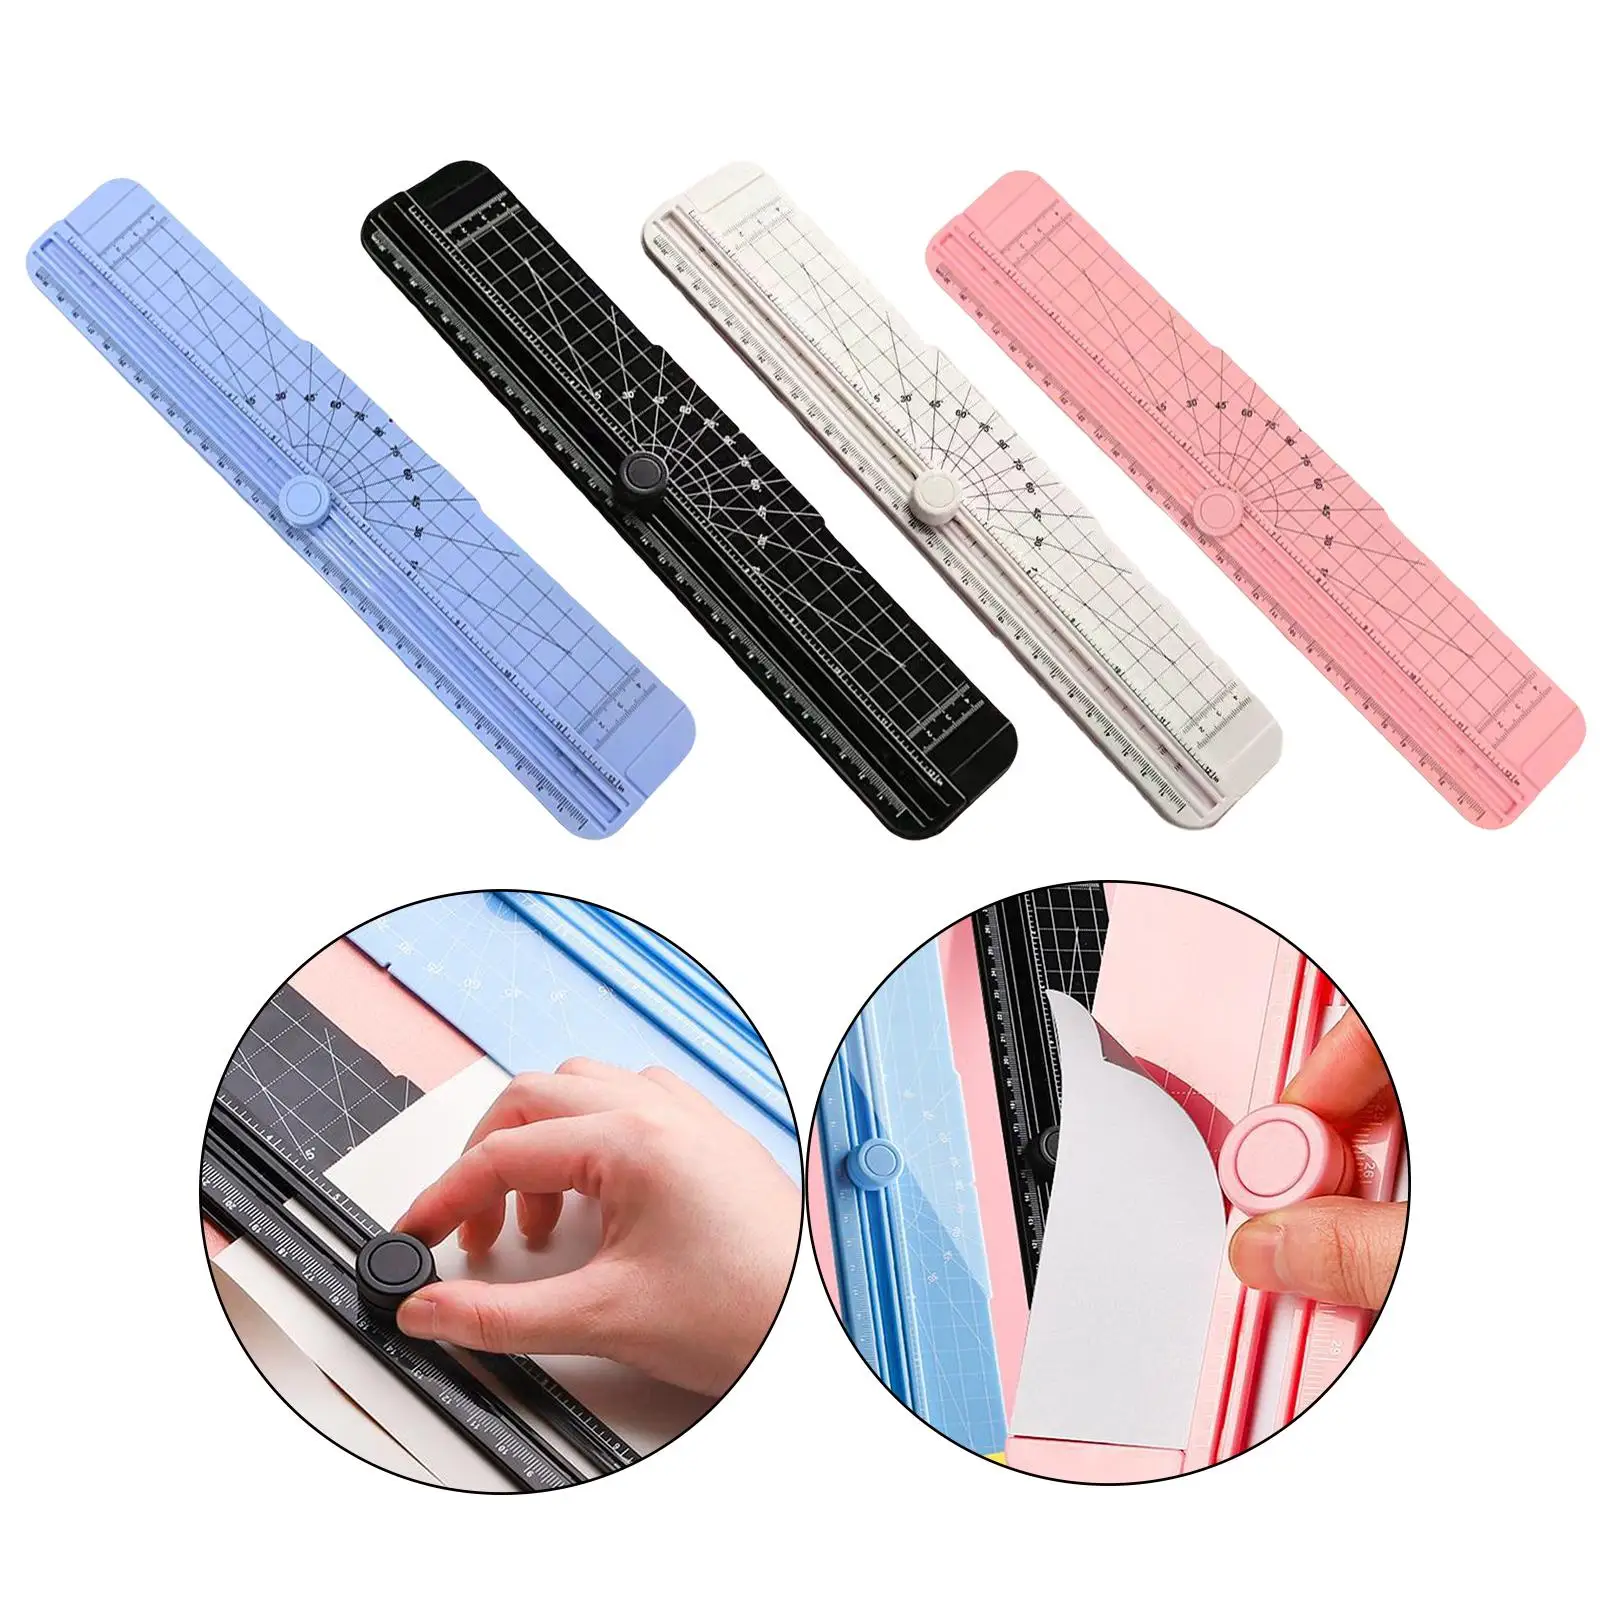 Paper Cutter Precision Tool for DIY Cardstock Craft Supplies